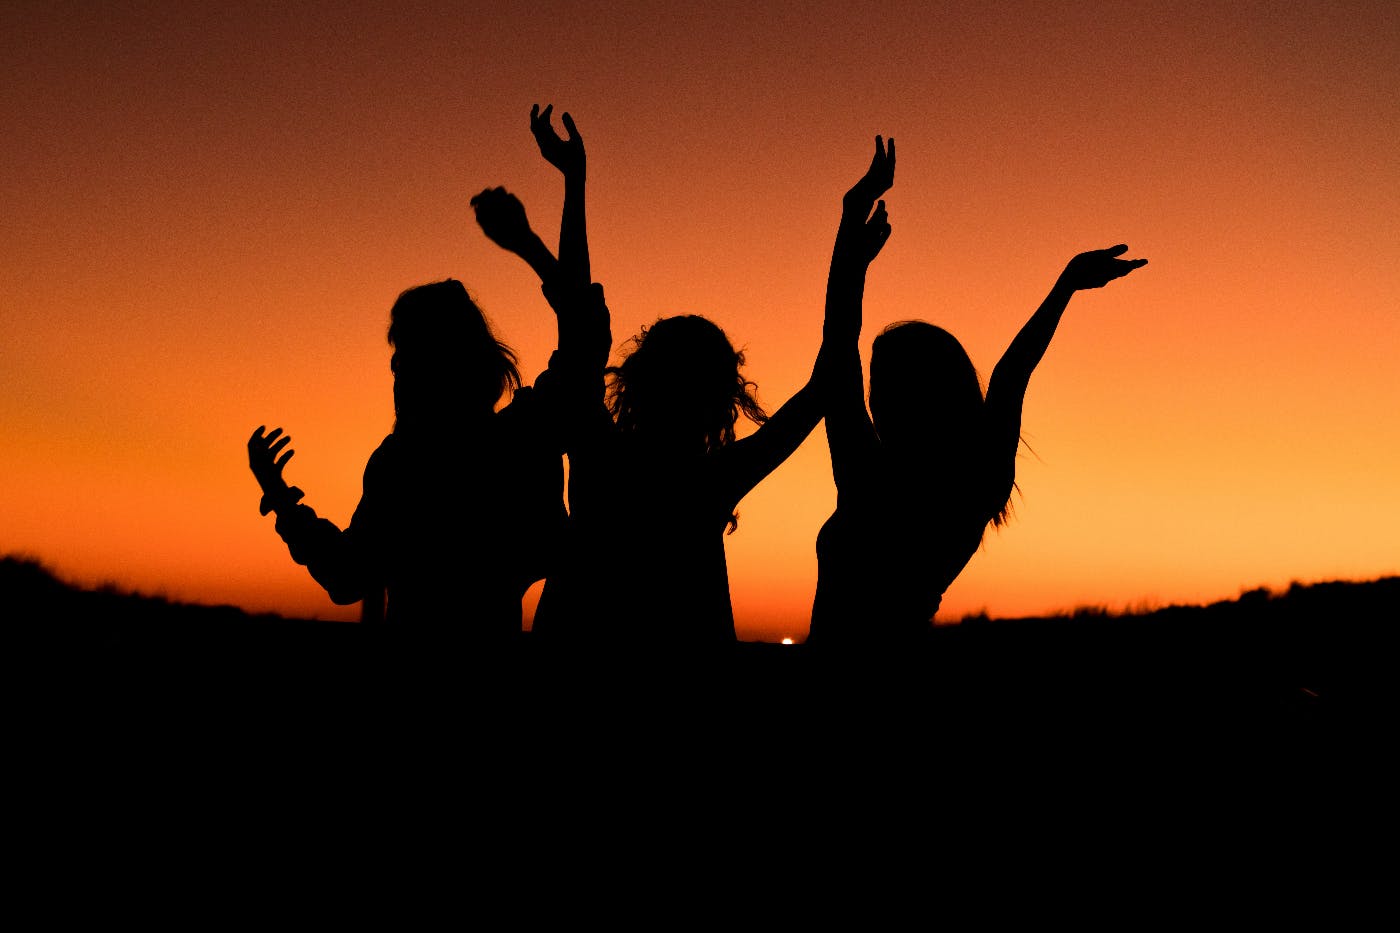 Three people in silhouette dancing at sunset